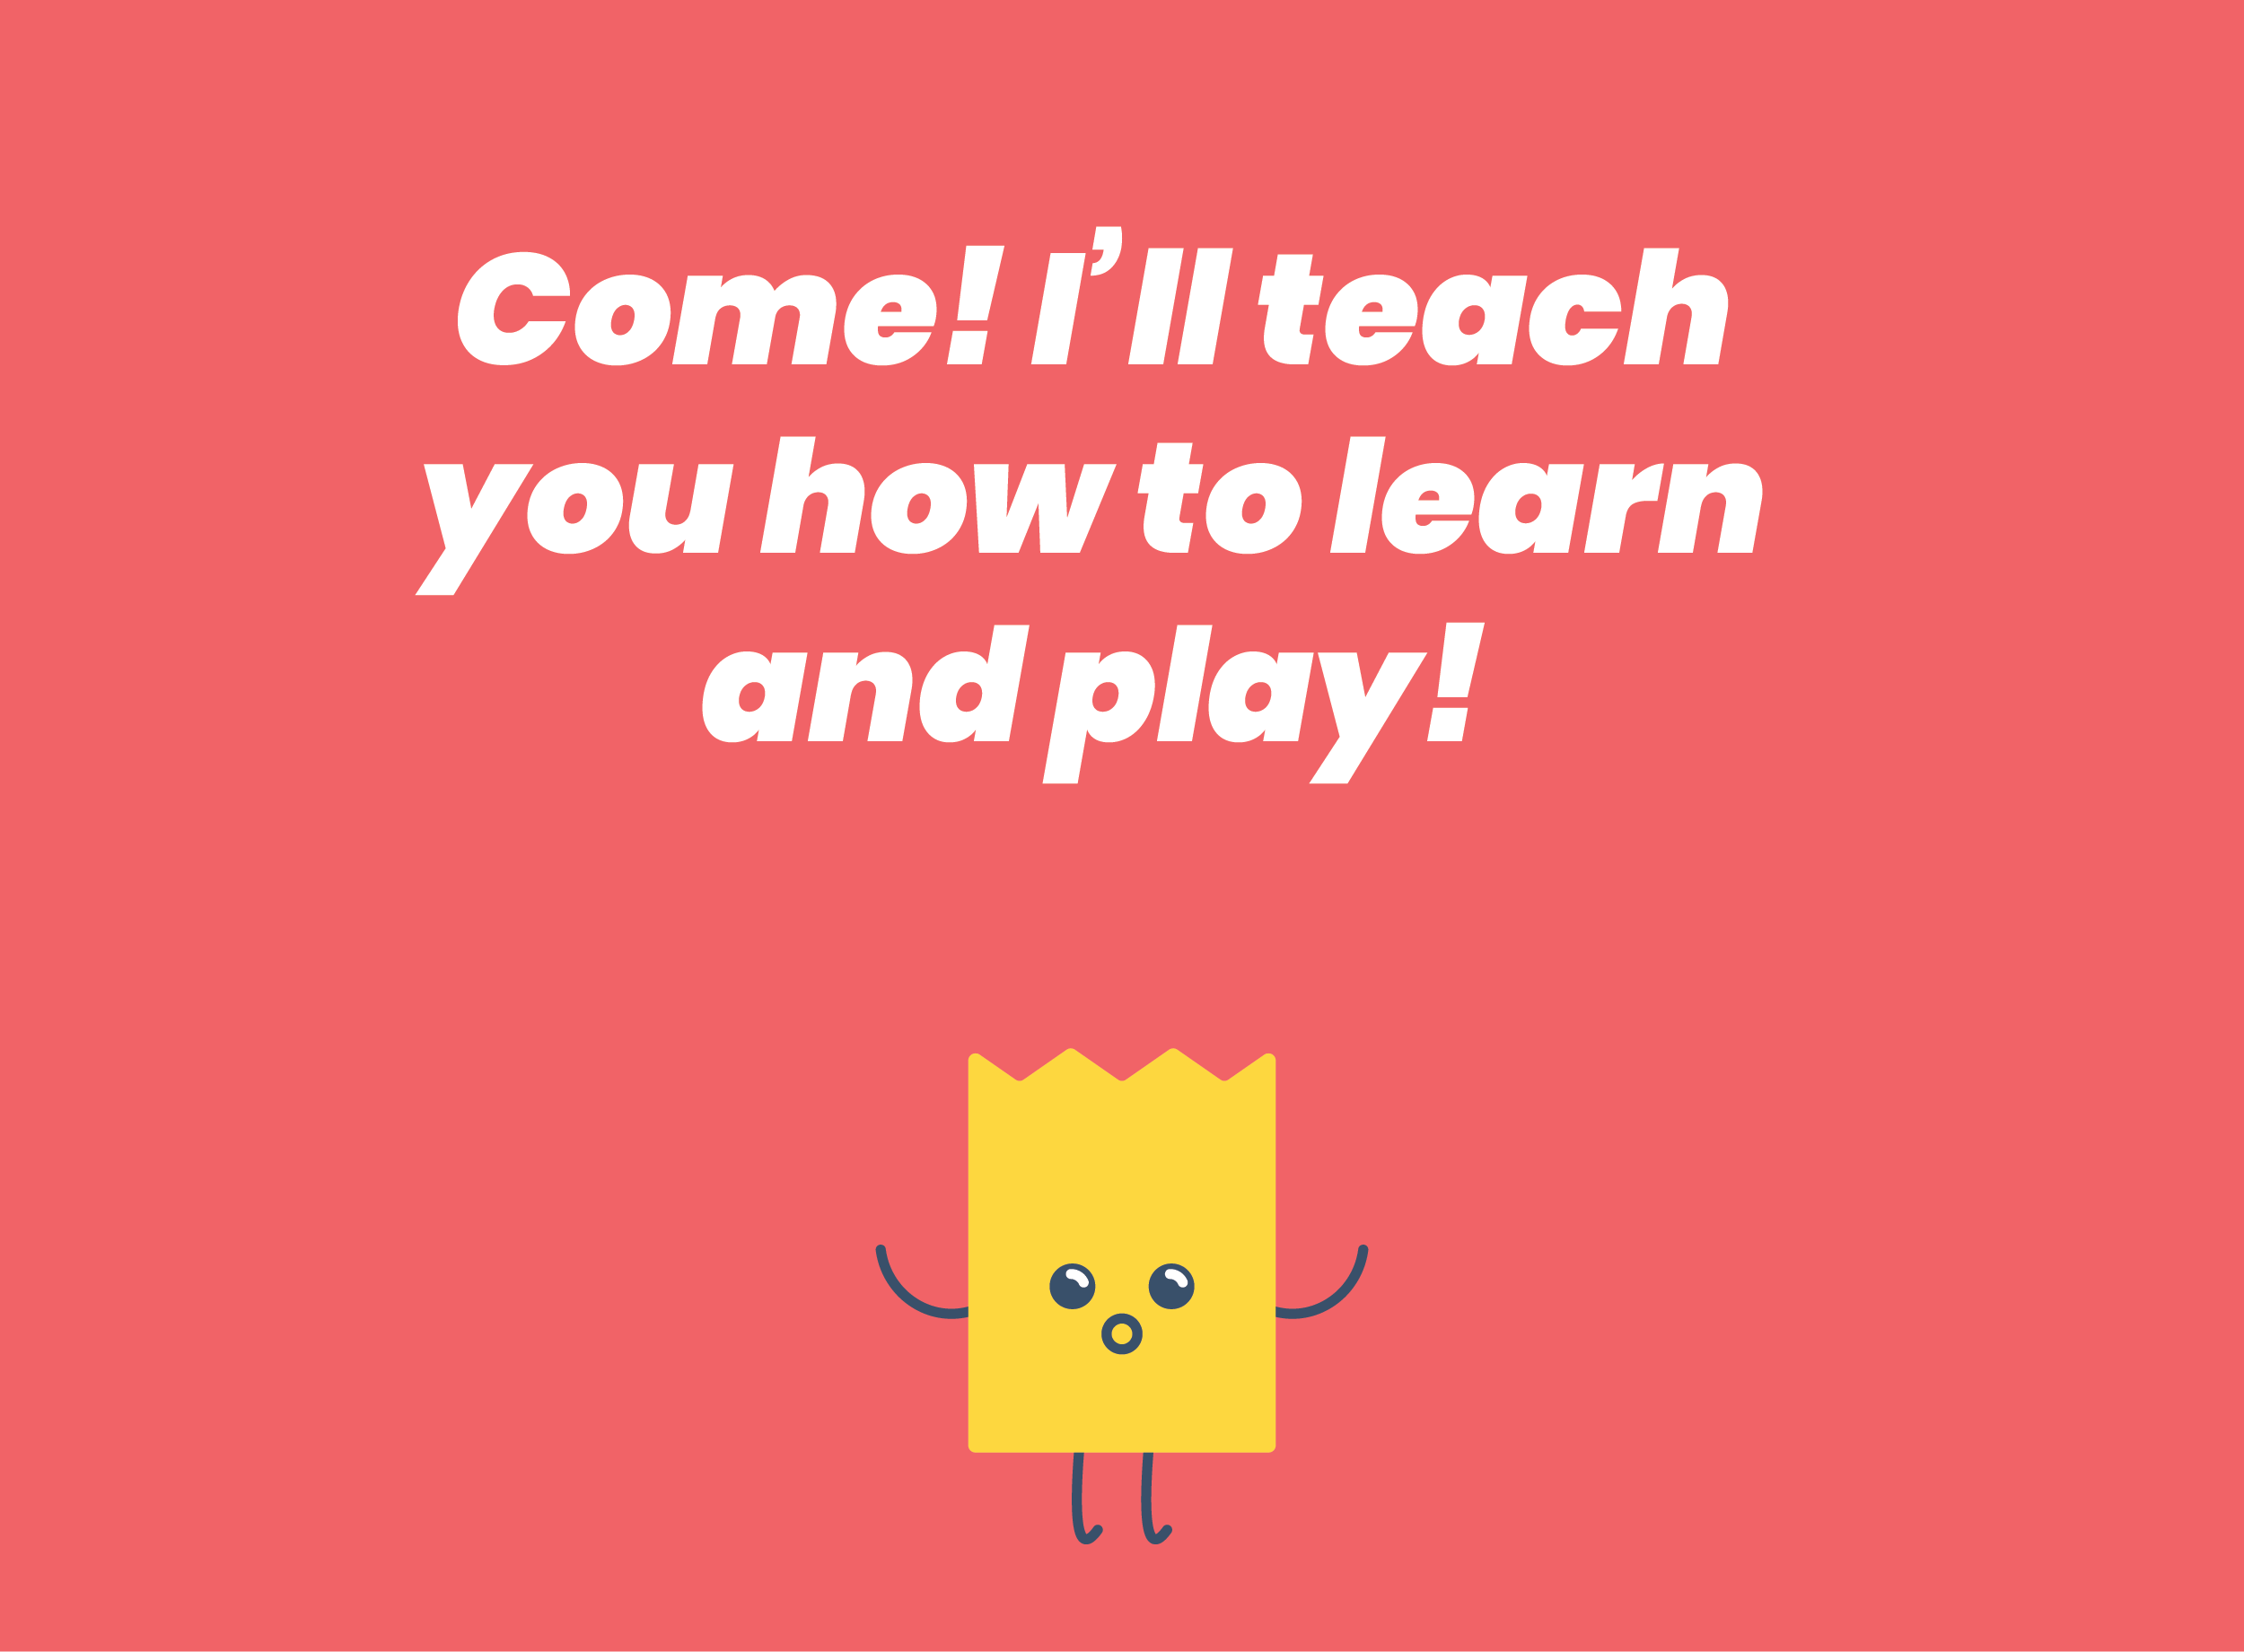 Come! I’ll teach you how to learn and play!